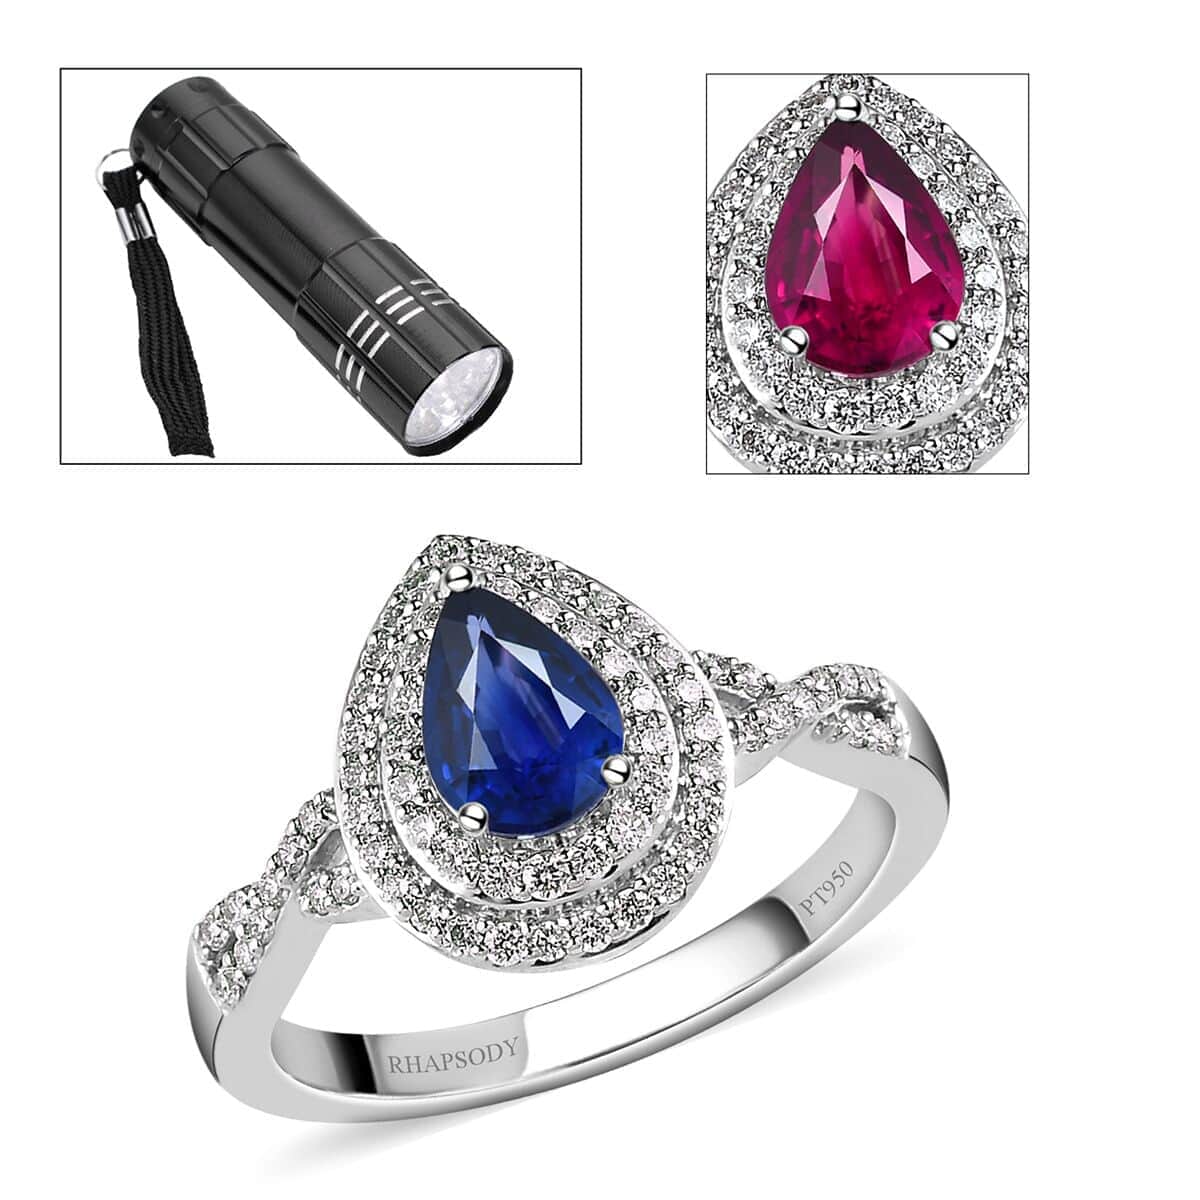 Ankur Treasure Chest Rhapsody 950 Platinum AAAA Tanzanian Color Change Sapphire and E-F VS2 Diamond Cocktail Ring (Size 8.0) 5.50 Grams 1.10 ctw with Free UV Flash Light image number 0